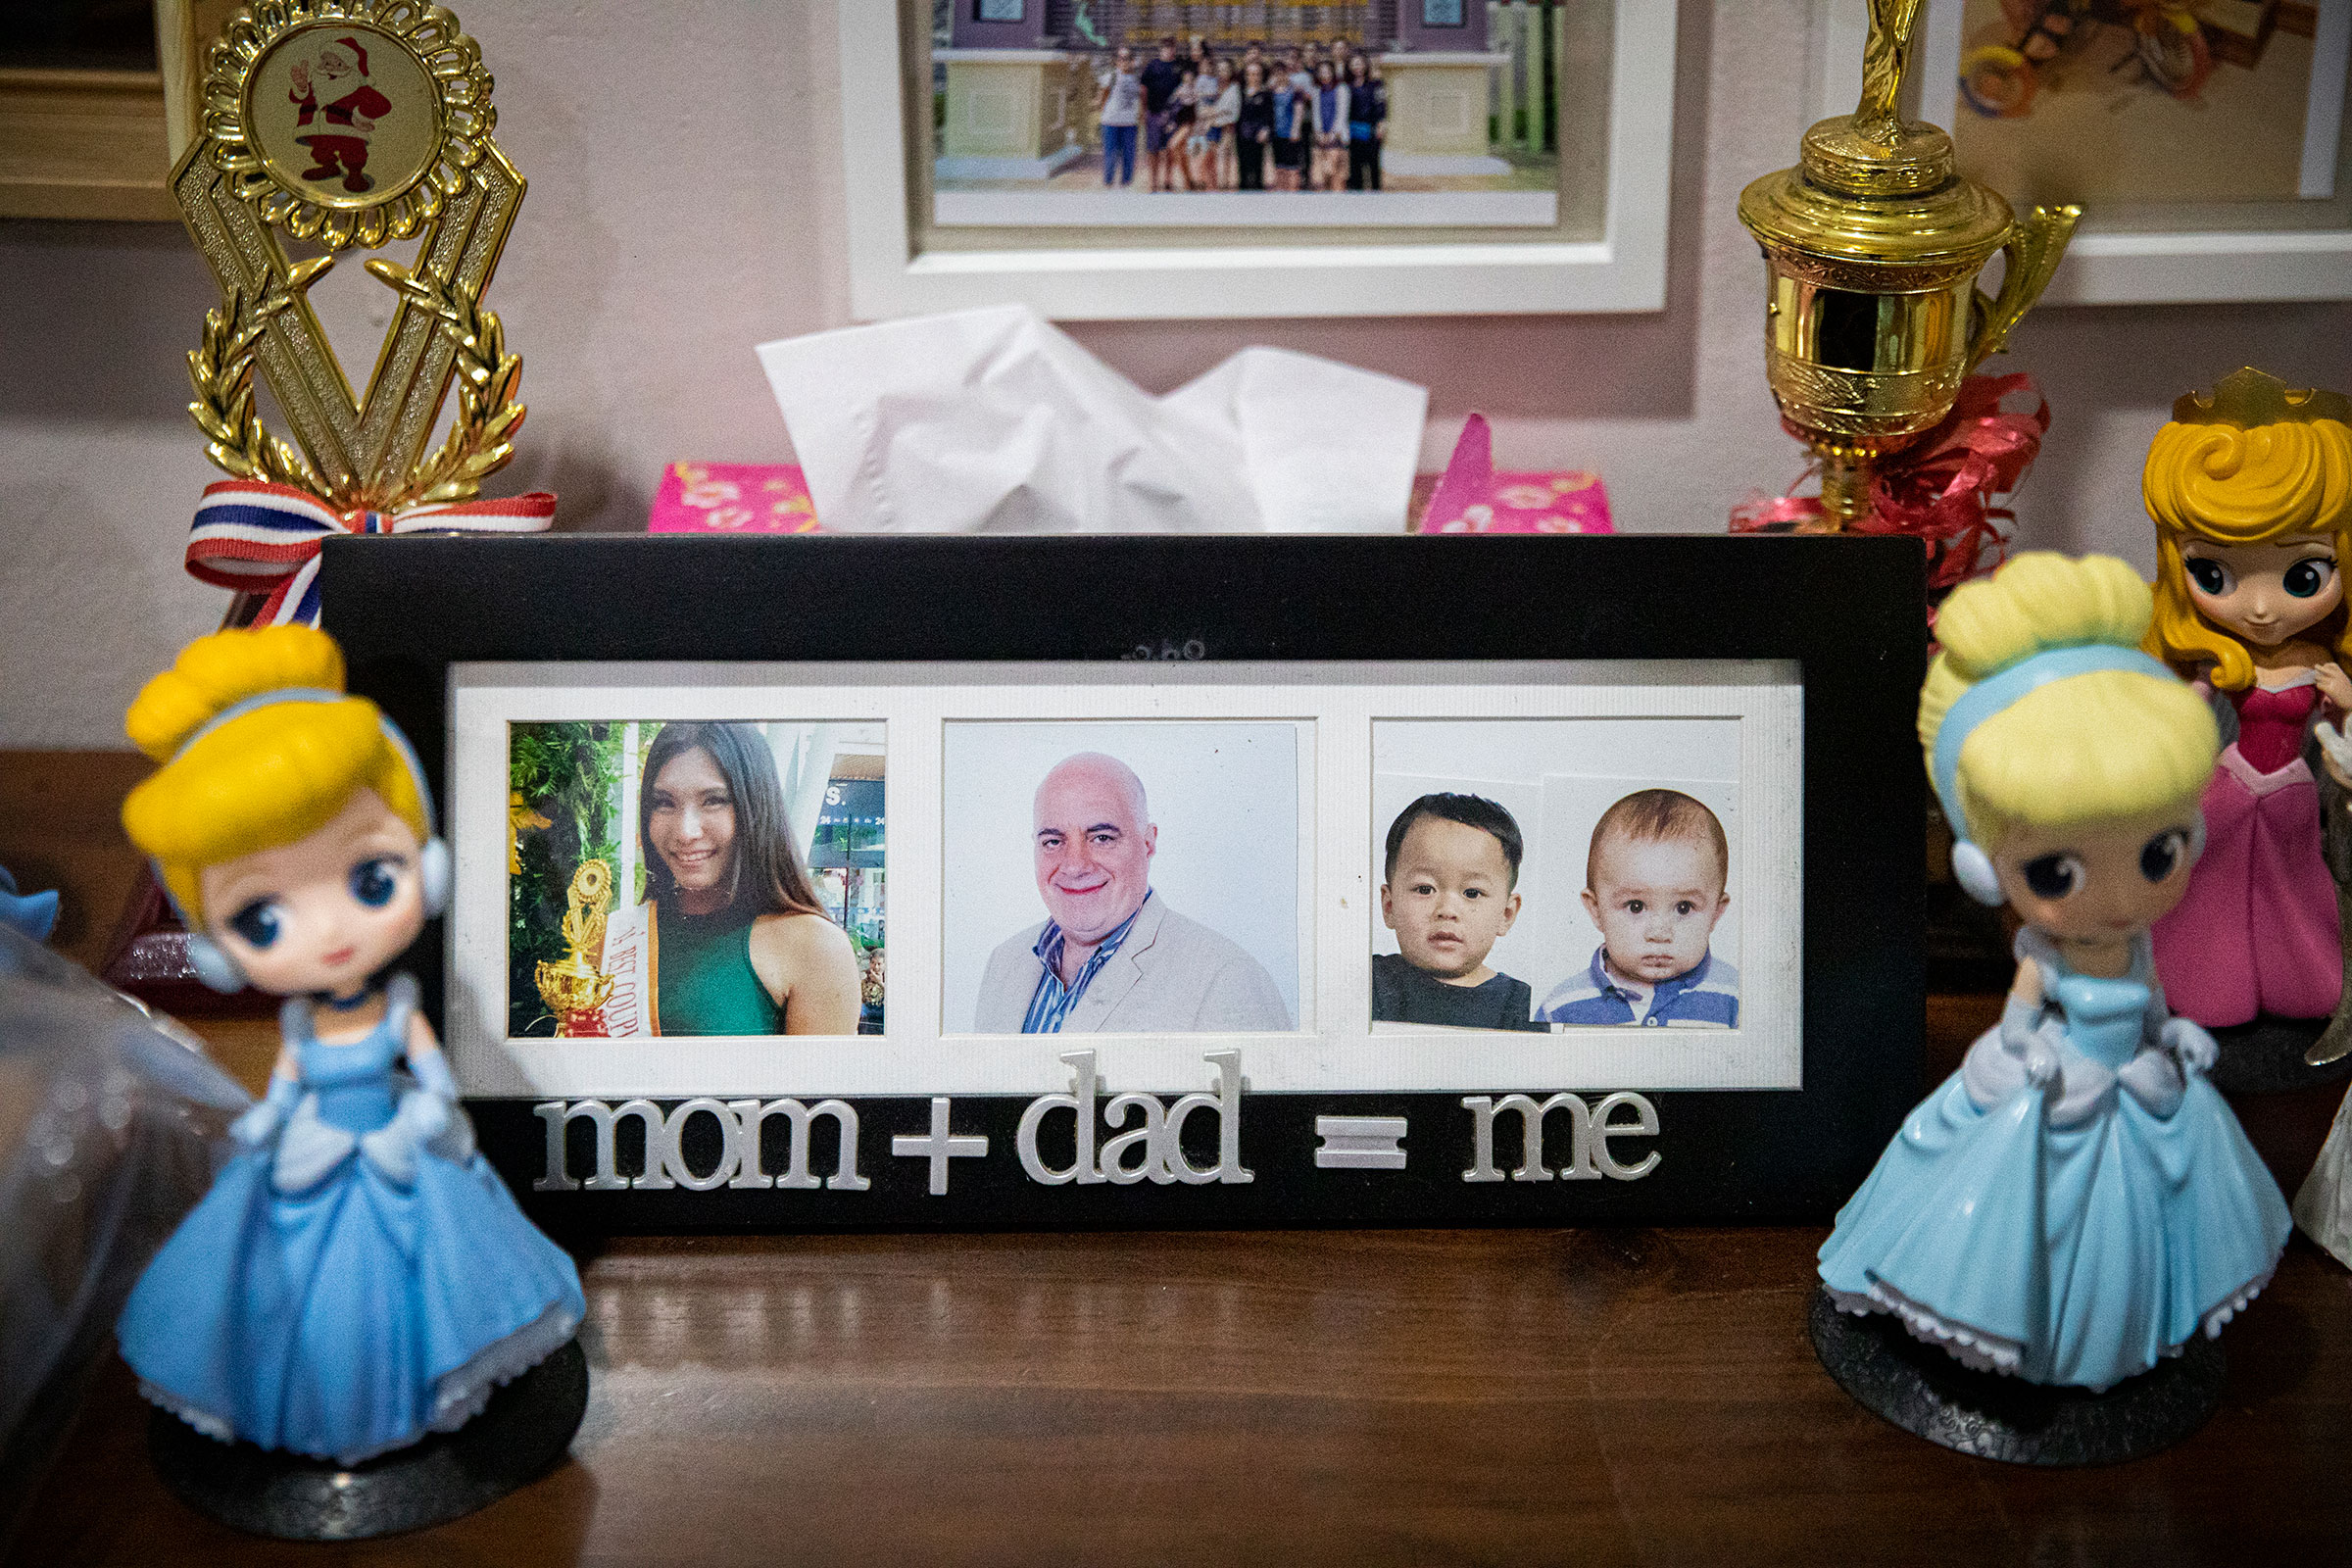 Ariya "Gina" Milintanapa and her partner, Lee Battia, have photos of them and their two sons on display in their family home on July 12, 2022 in Bangkok, Thailand.  Ariya "Gina" Milintanapa, a Thai transgender woman, and her American partner, Lee Battia, live in Bangkok, Thailand with their two children, Chene, 8, and Charlie, 6. Although the couple has been together for nearly 20 years, due to the country's conservative marriage laws, Gina and Lee have been unable to officially marry in Thailand, leading to struggles over joint guardianship of their two children. Under current laws, Lee currently has guardianship rights to Chene and Gina has guardianship rights to Charlie. While globally Thailand is considered an inclusive and accepting country for LGBTQ communities and tourists, those living in Thailand struggle for equal rights as courts historically ruled against same-sex marriage. Couples like Gina and Lee hold out hope for joint custody as Thailand's parliament preliminarily approved a bill to recognize same-sex marriage on June 15, 2022. Photo by Lauren DeCicca for TIME